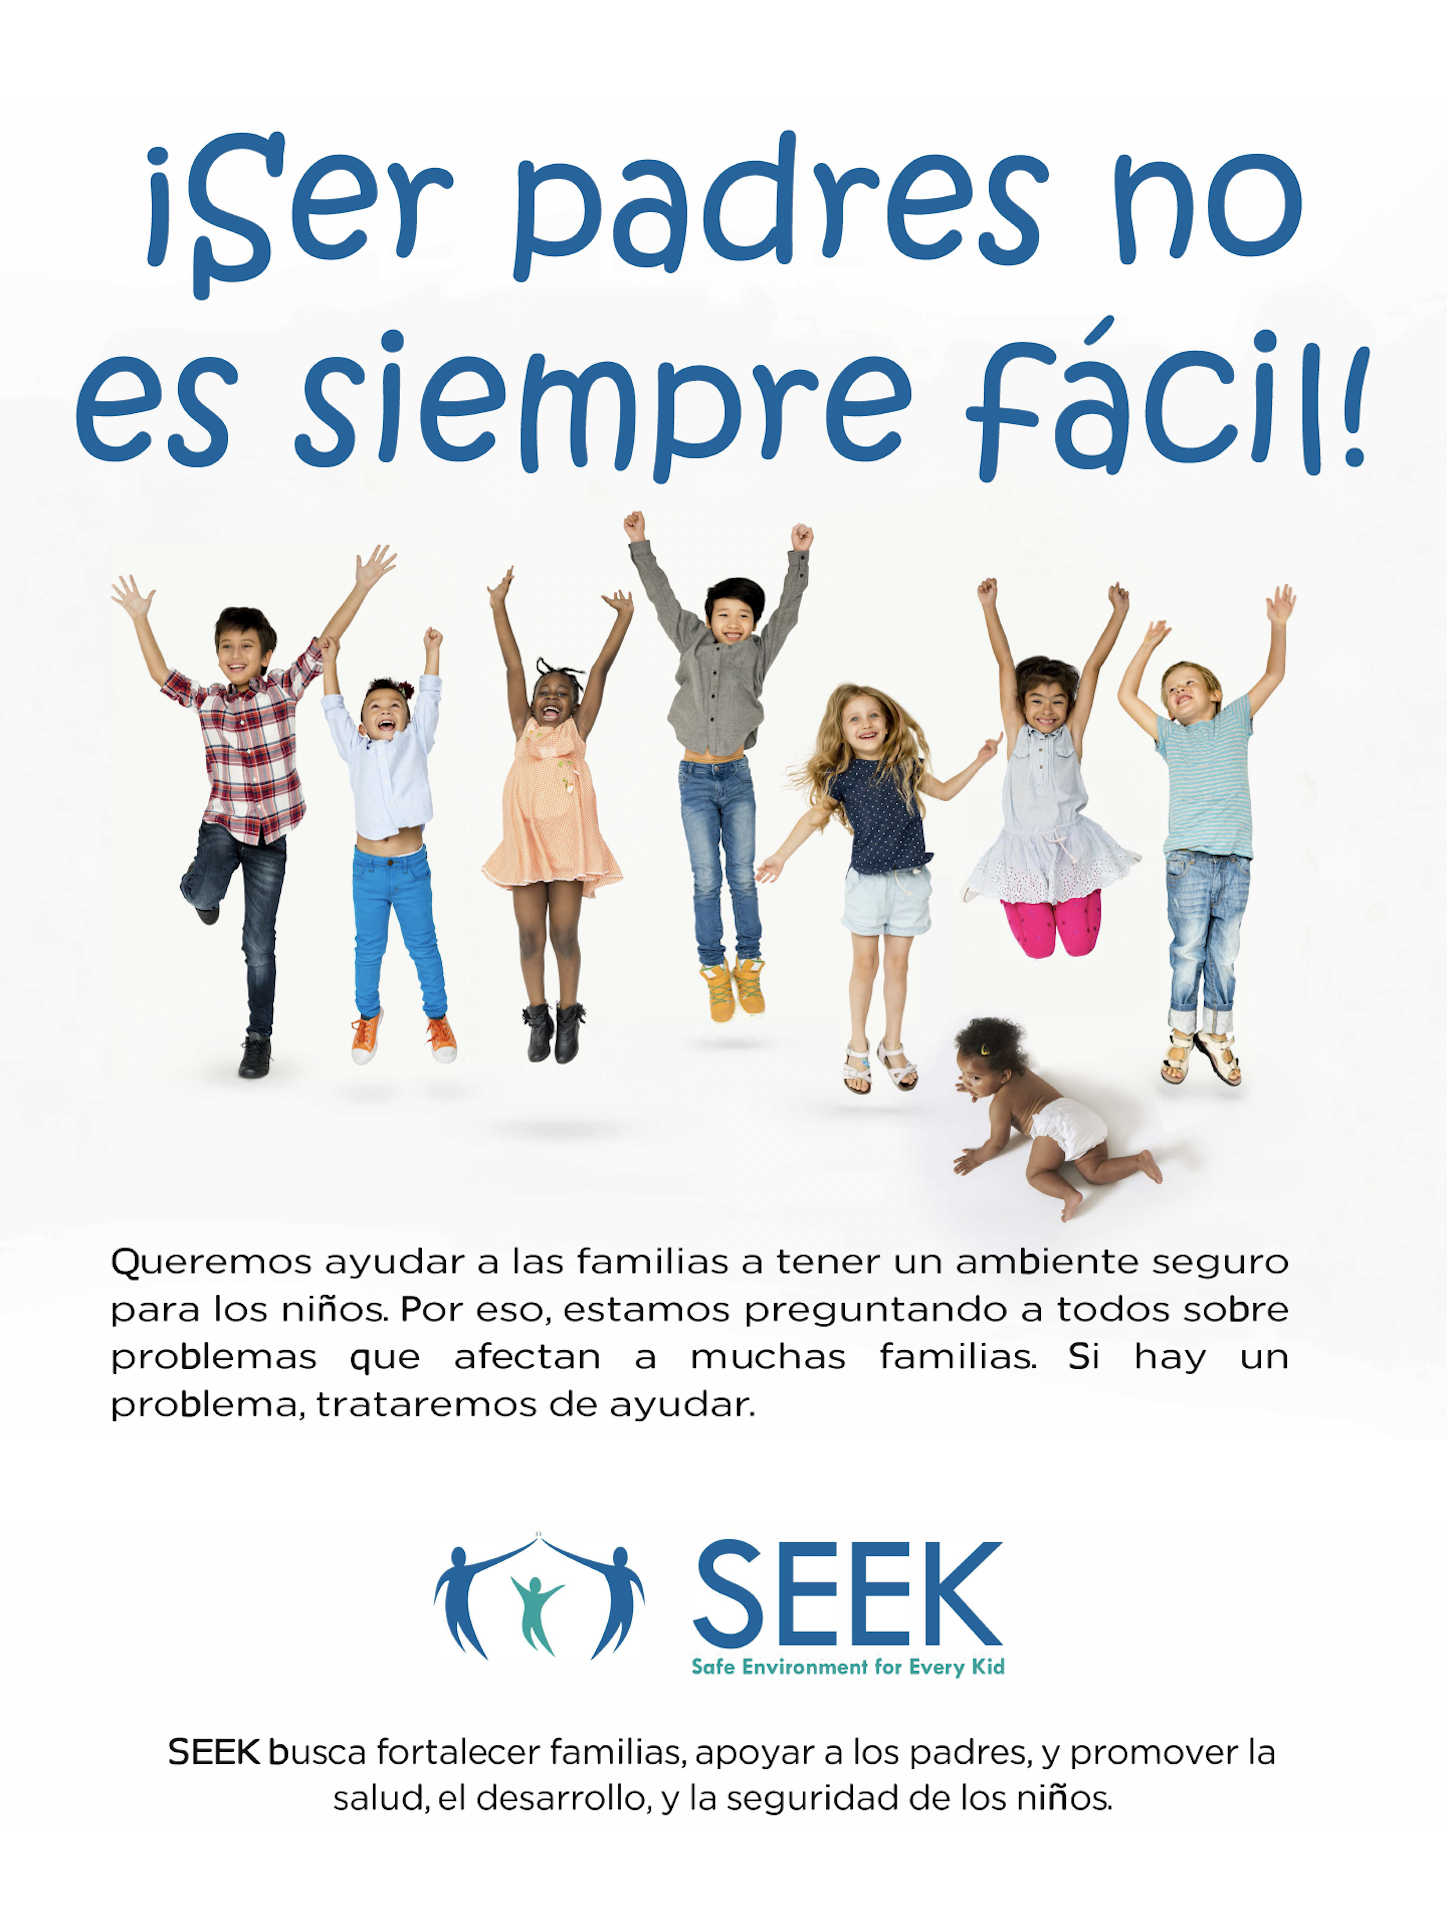 Image with text about SEEK helping families in Spanish